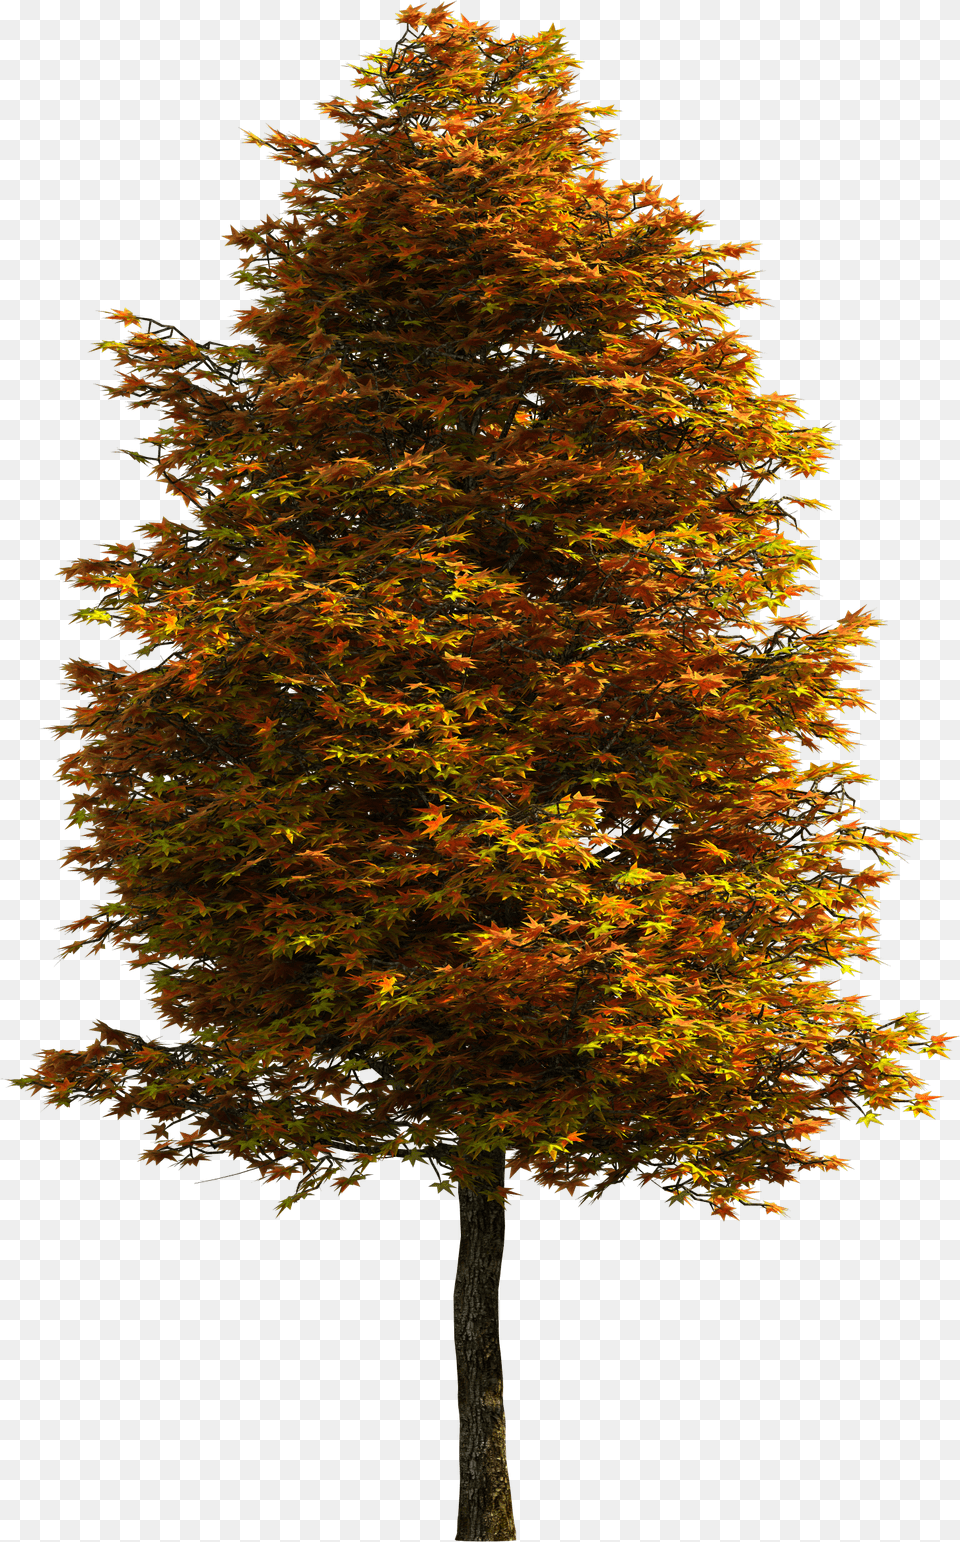 Tree Download Clipart Portable Network Graphics, Leaf, Maple, Plant, Tree Trunk Png Image